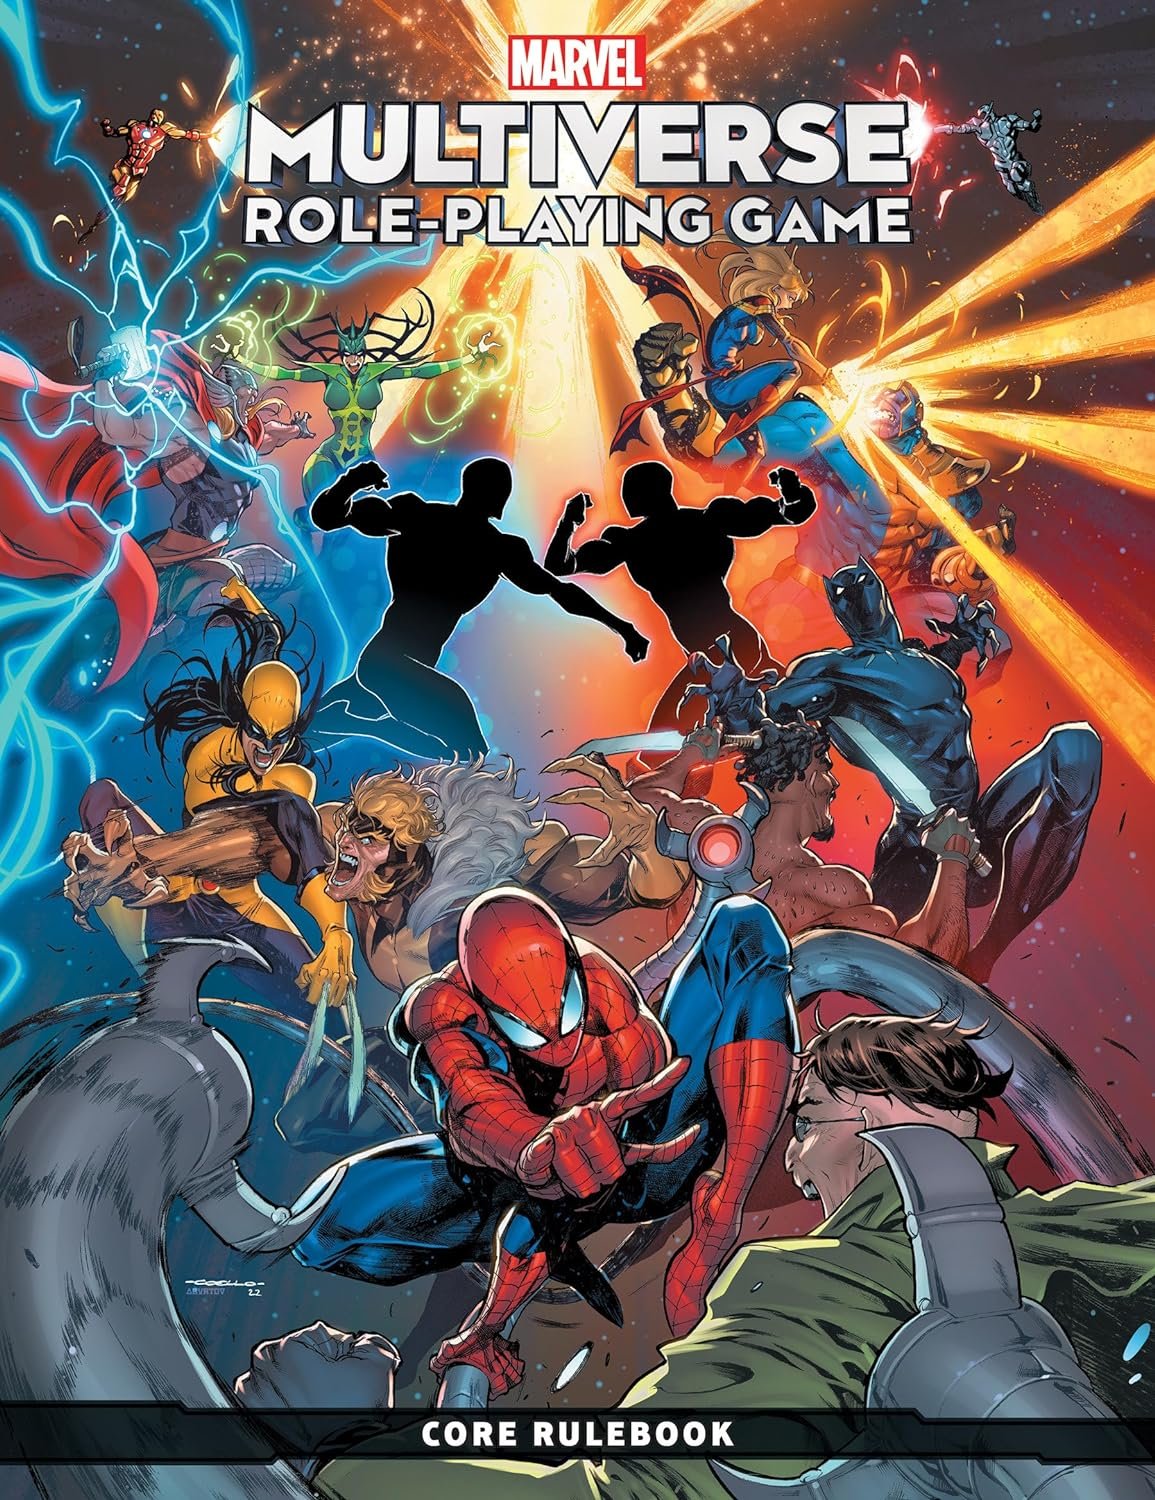 MARVEL MULTIVERSE ROLE-PLAYING GAME: CORE RULEBOOK Review